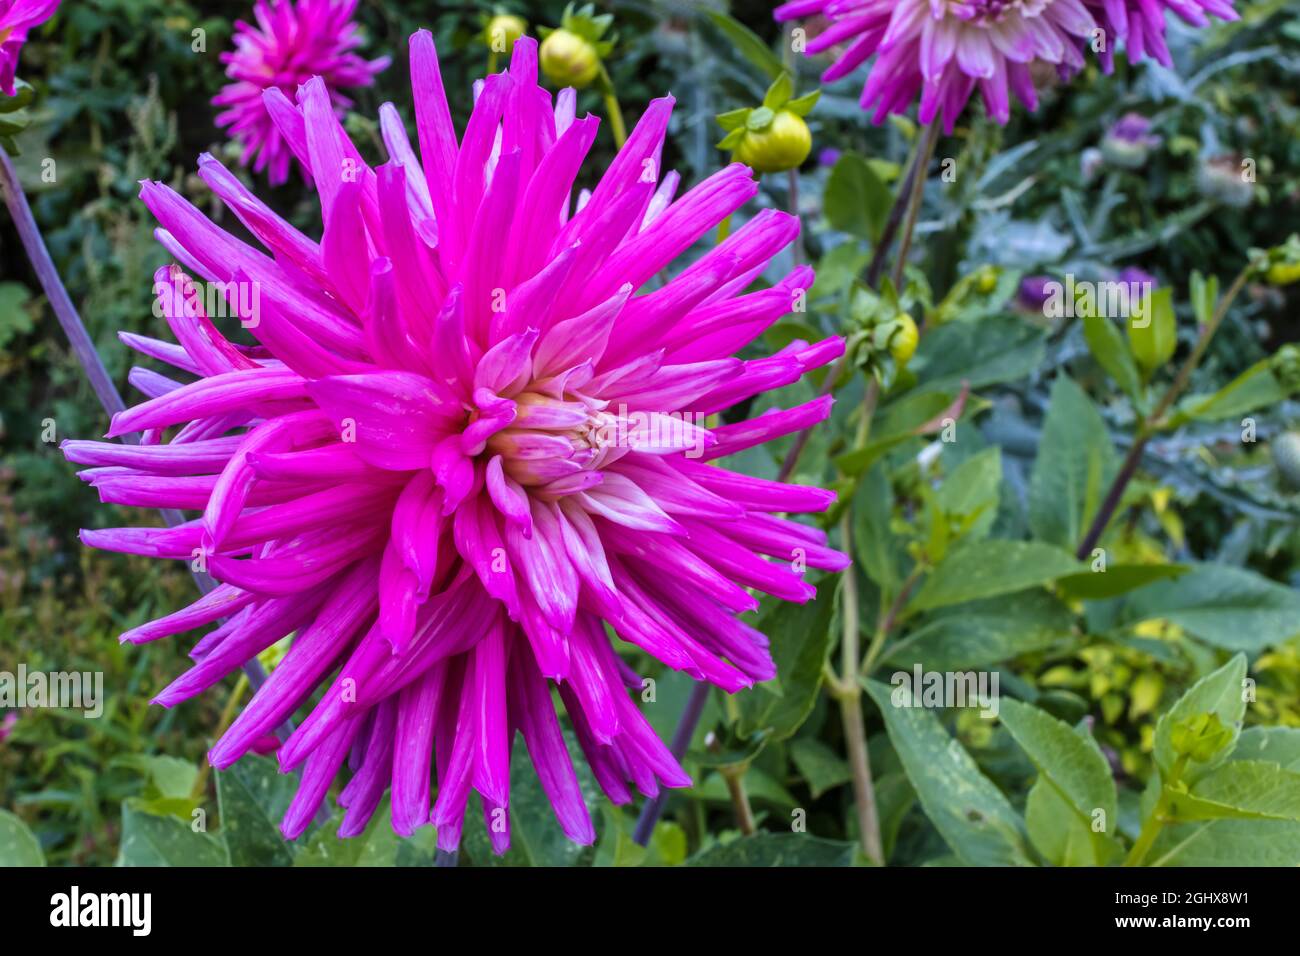 Large head of deep pink cactus dahlia flower in a garden close-up. Stock Photo